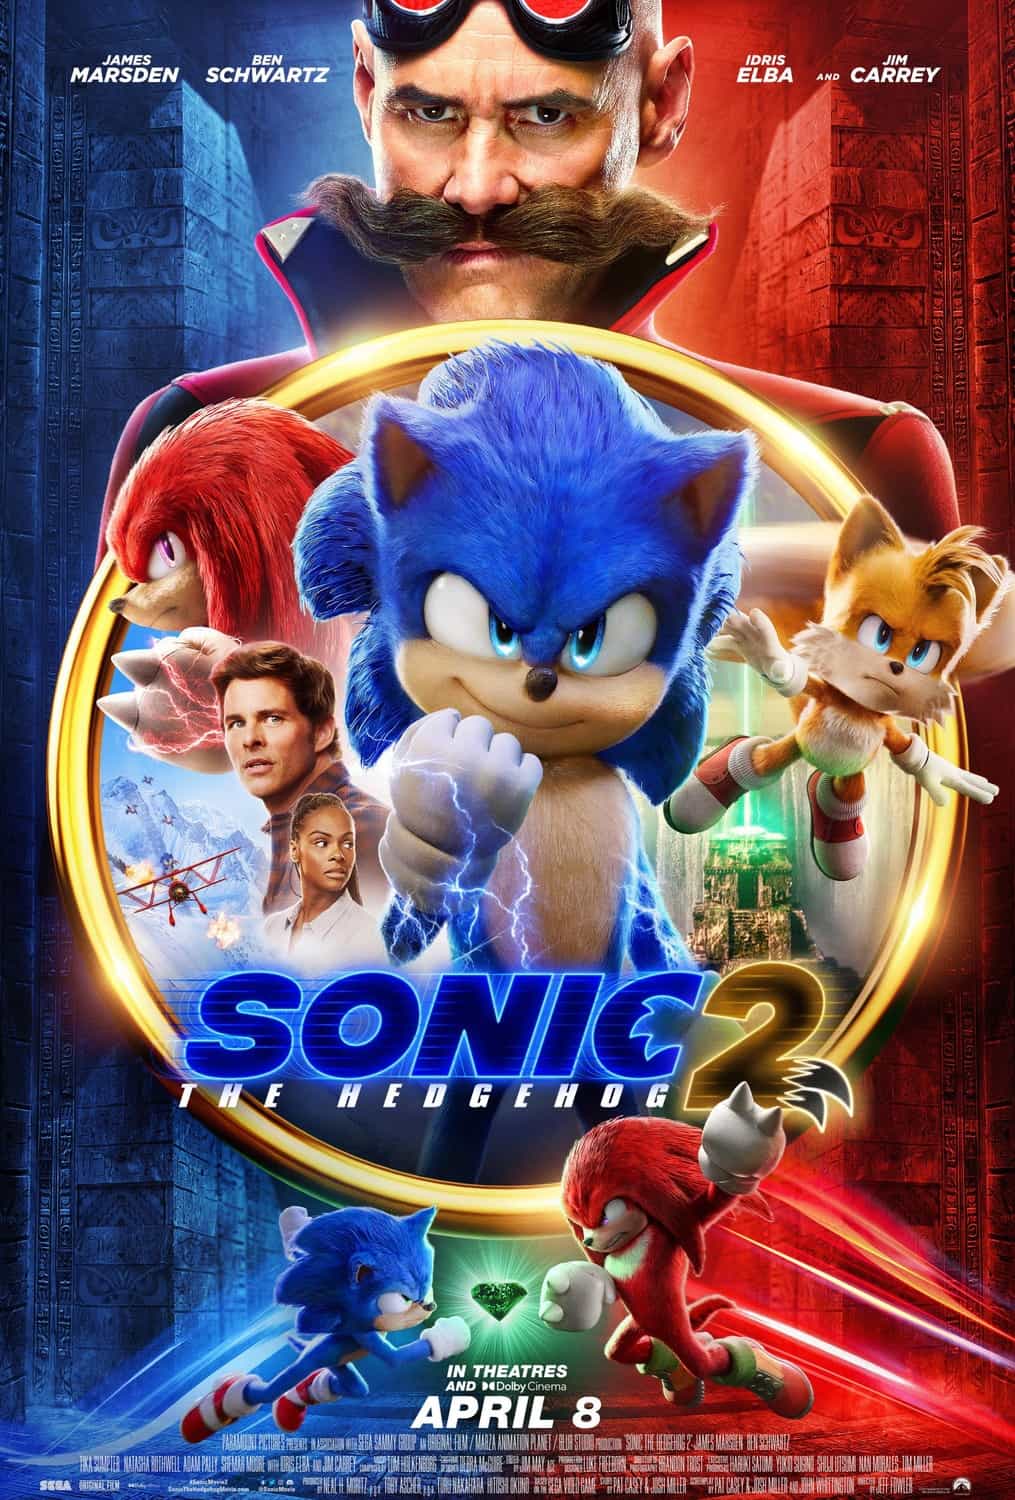 Sonic The Hedgehog 2 has been announced, and it looks like Tails will be in it, released April 8 2022